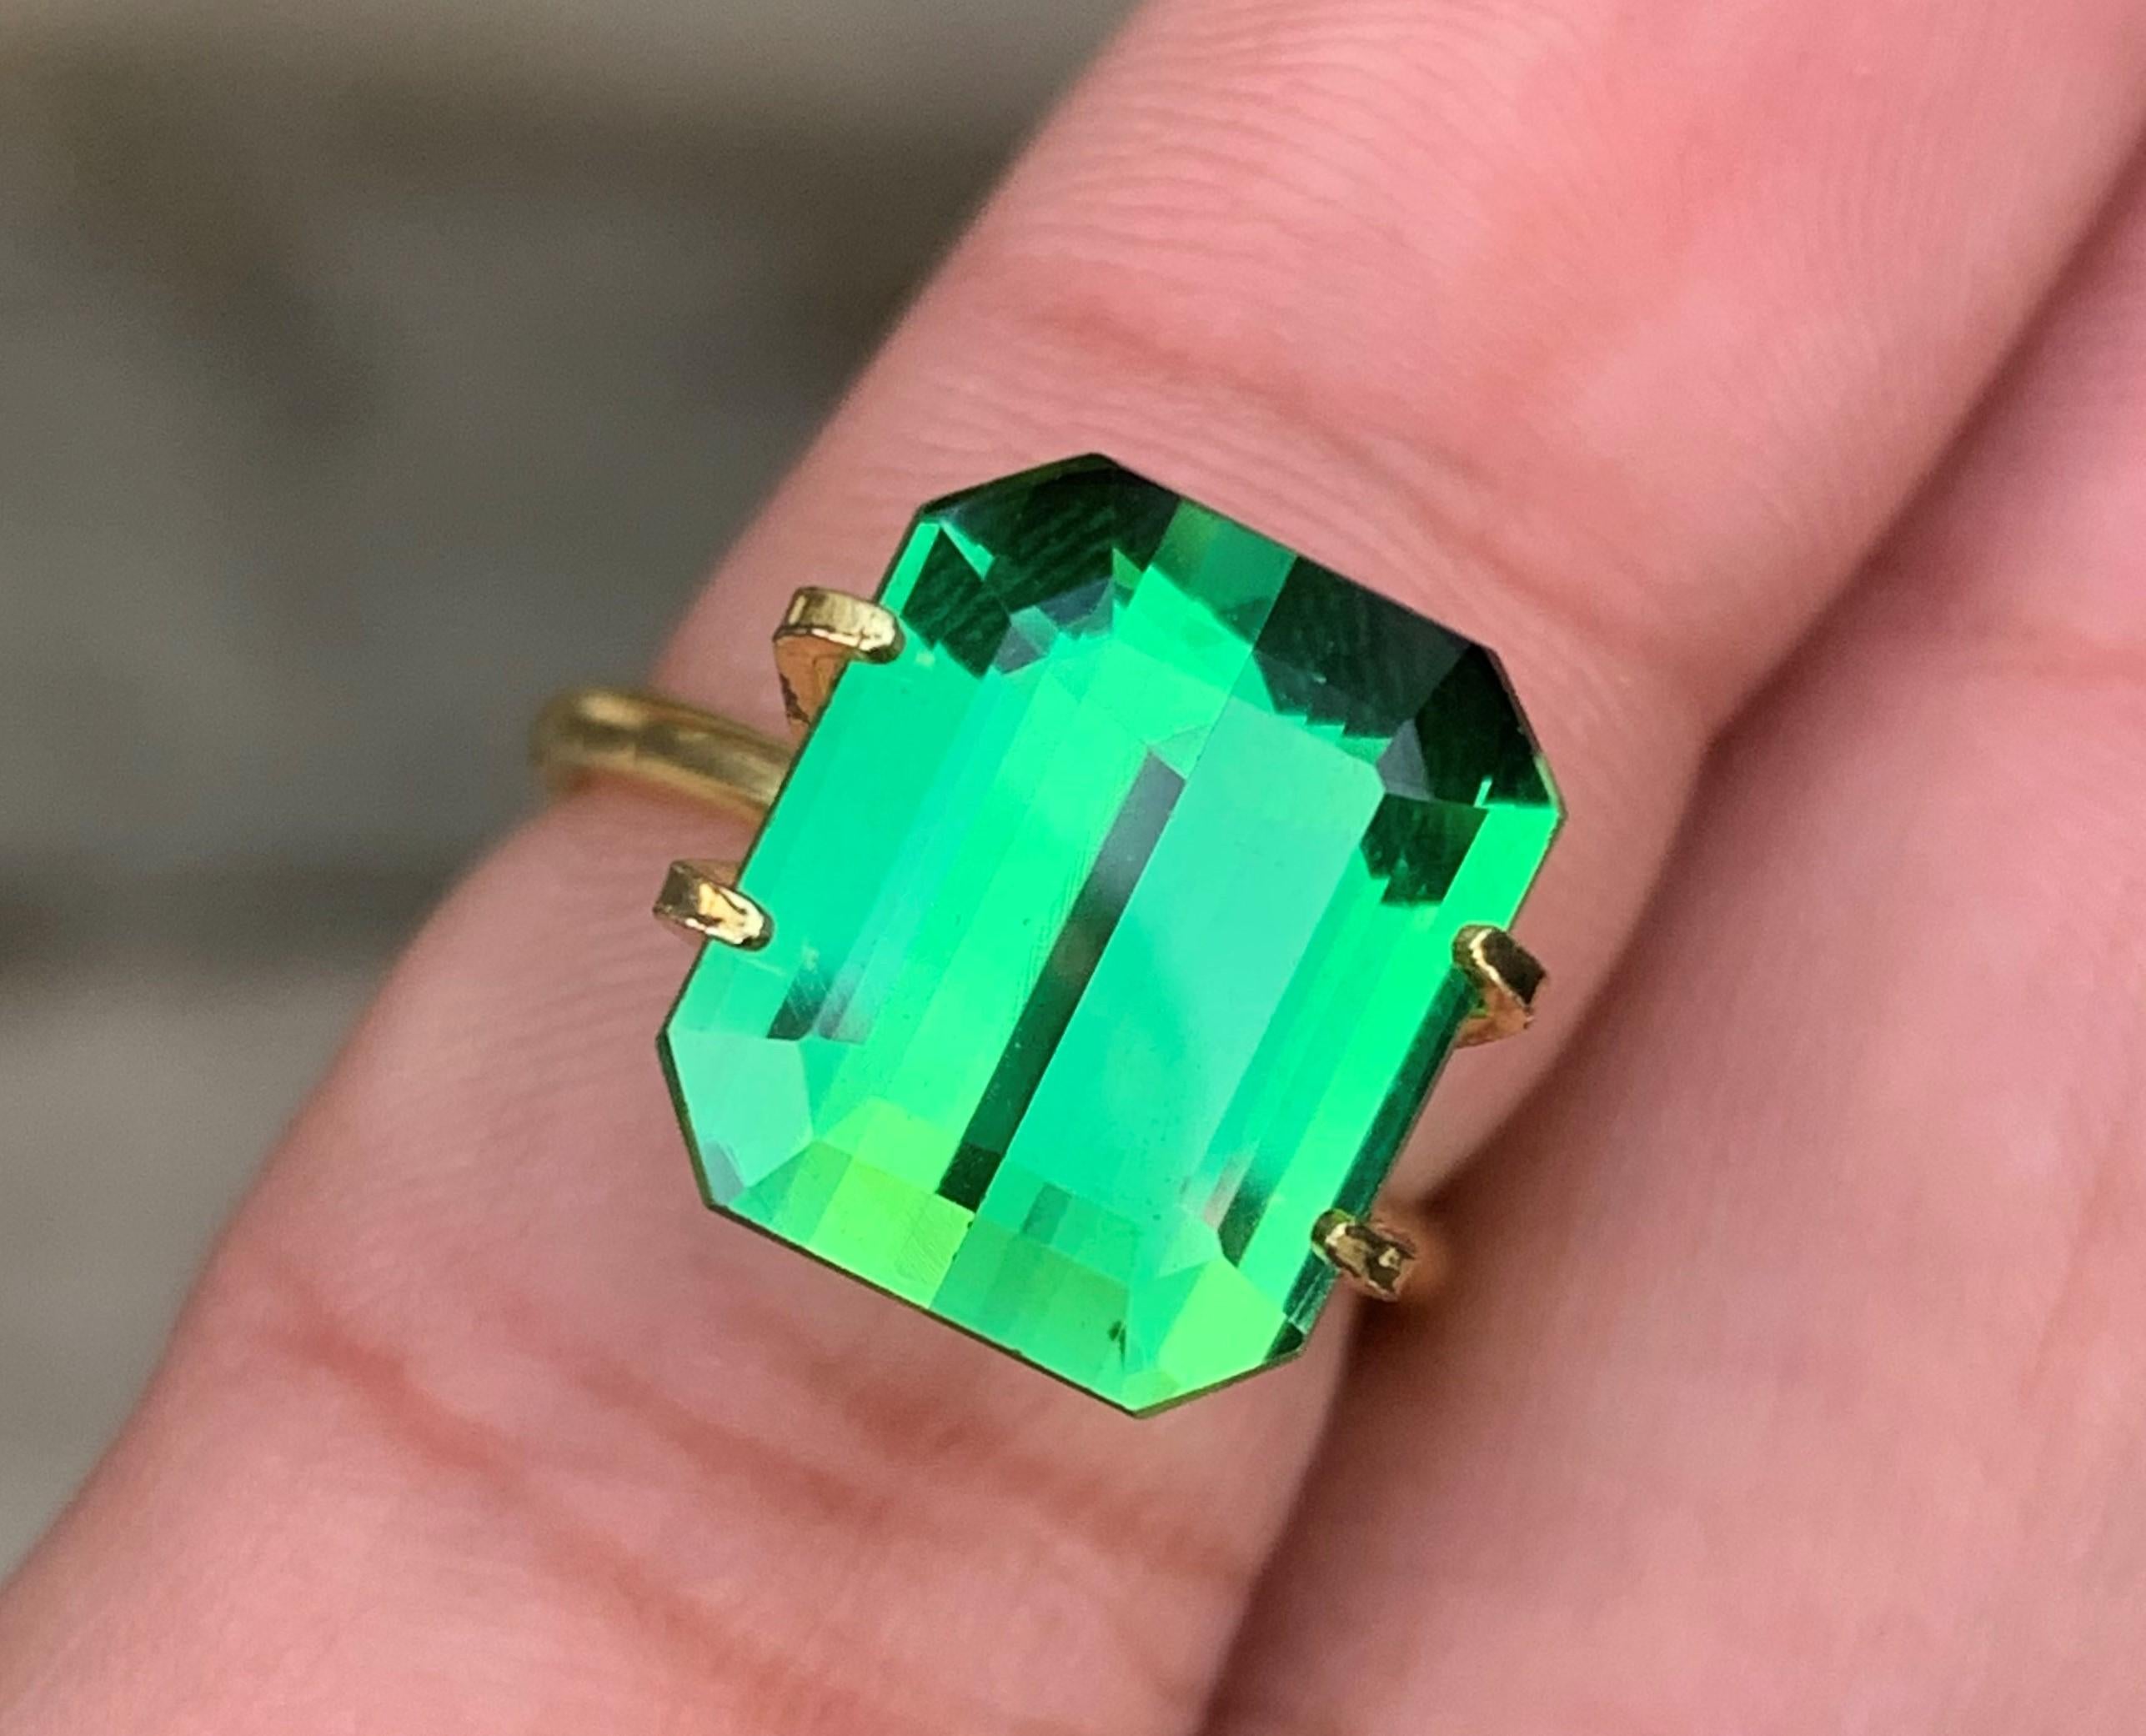 Faceted Tourmaline
Weight: 7.35 Carats
Dimension: 12.6x10.6x6.6 Mm
Origin: Kunar Afghanistan Mine
Shape: Emerald 
Color: Green
Quality: AAA
Certificate: On Demand
Green Tourmaline moves healing energy throughout the body, bringing a sense of